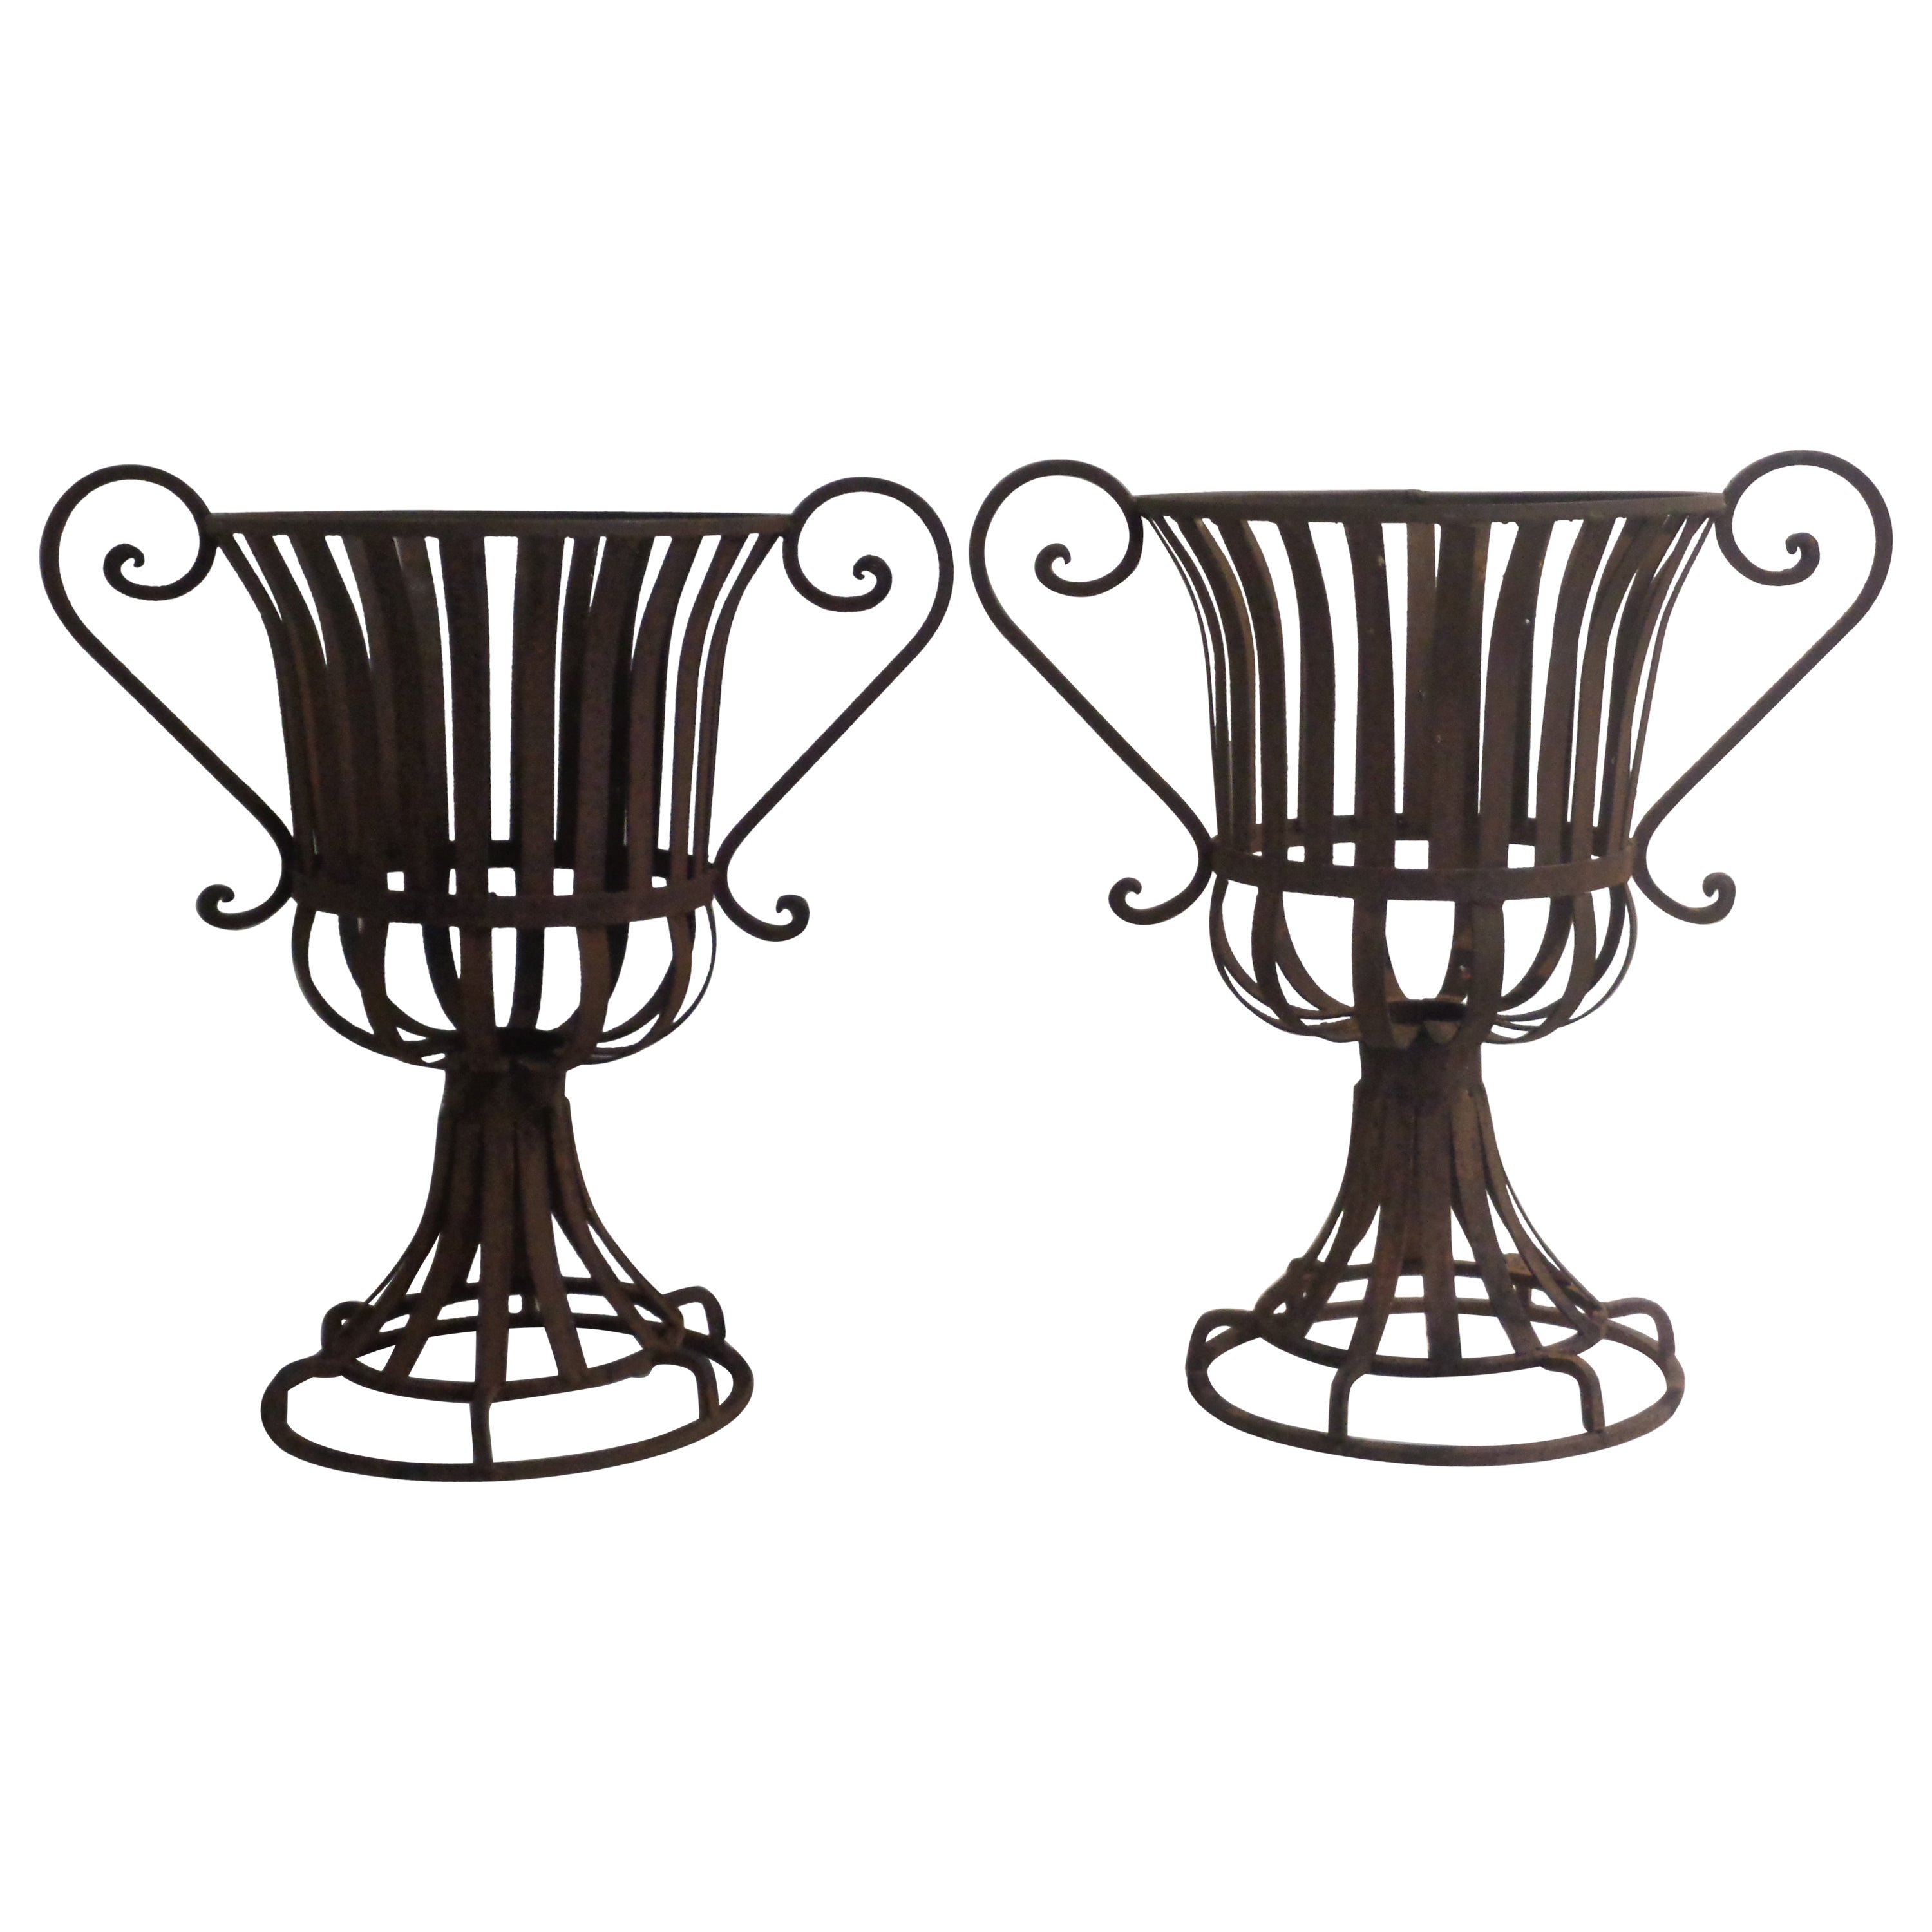 Pair Neoclassical Style Strap Iron Garden Urns, Circa 1970-1980 For Sale